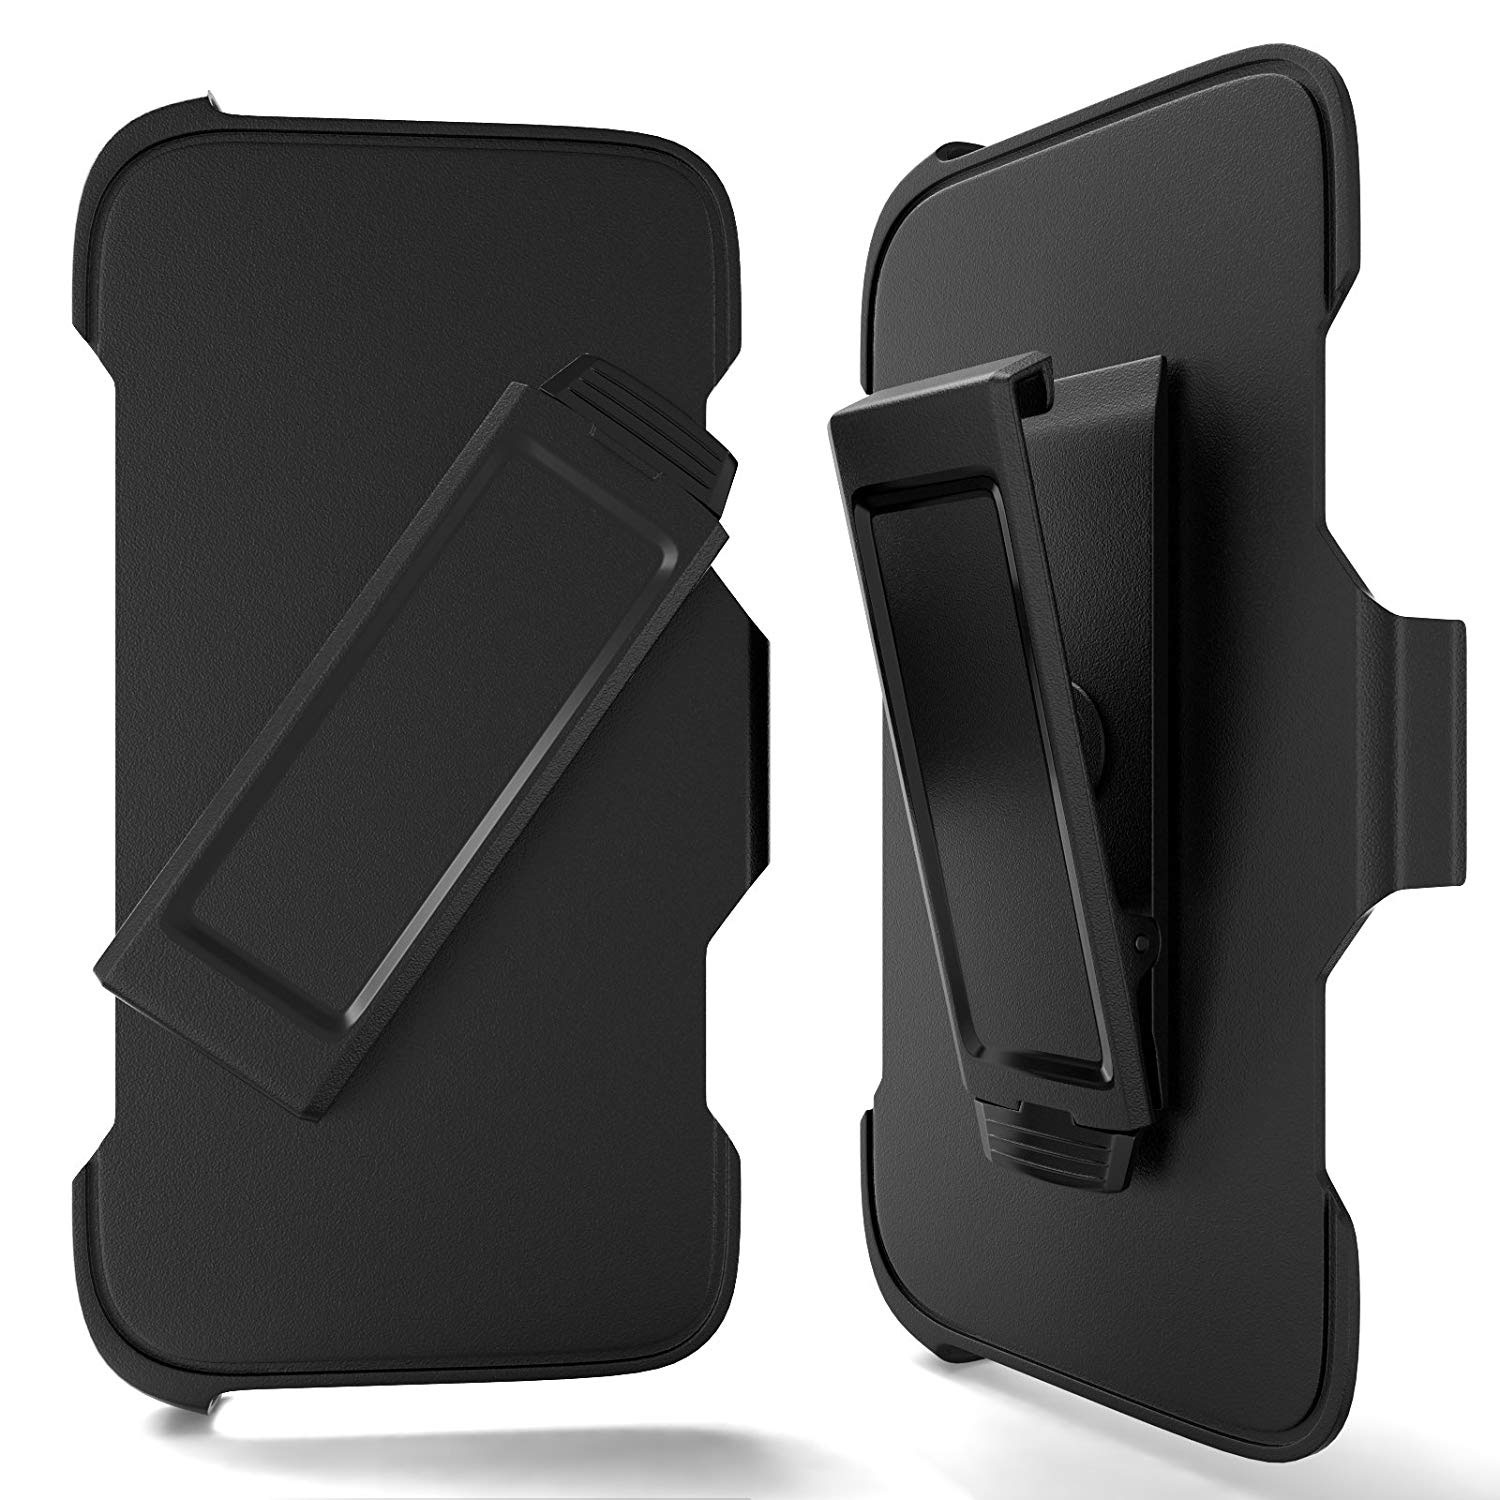 iPHONE 11 (6.1in) Armor Robot Clip Only (Black)